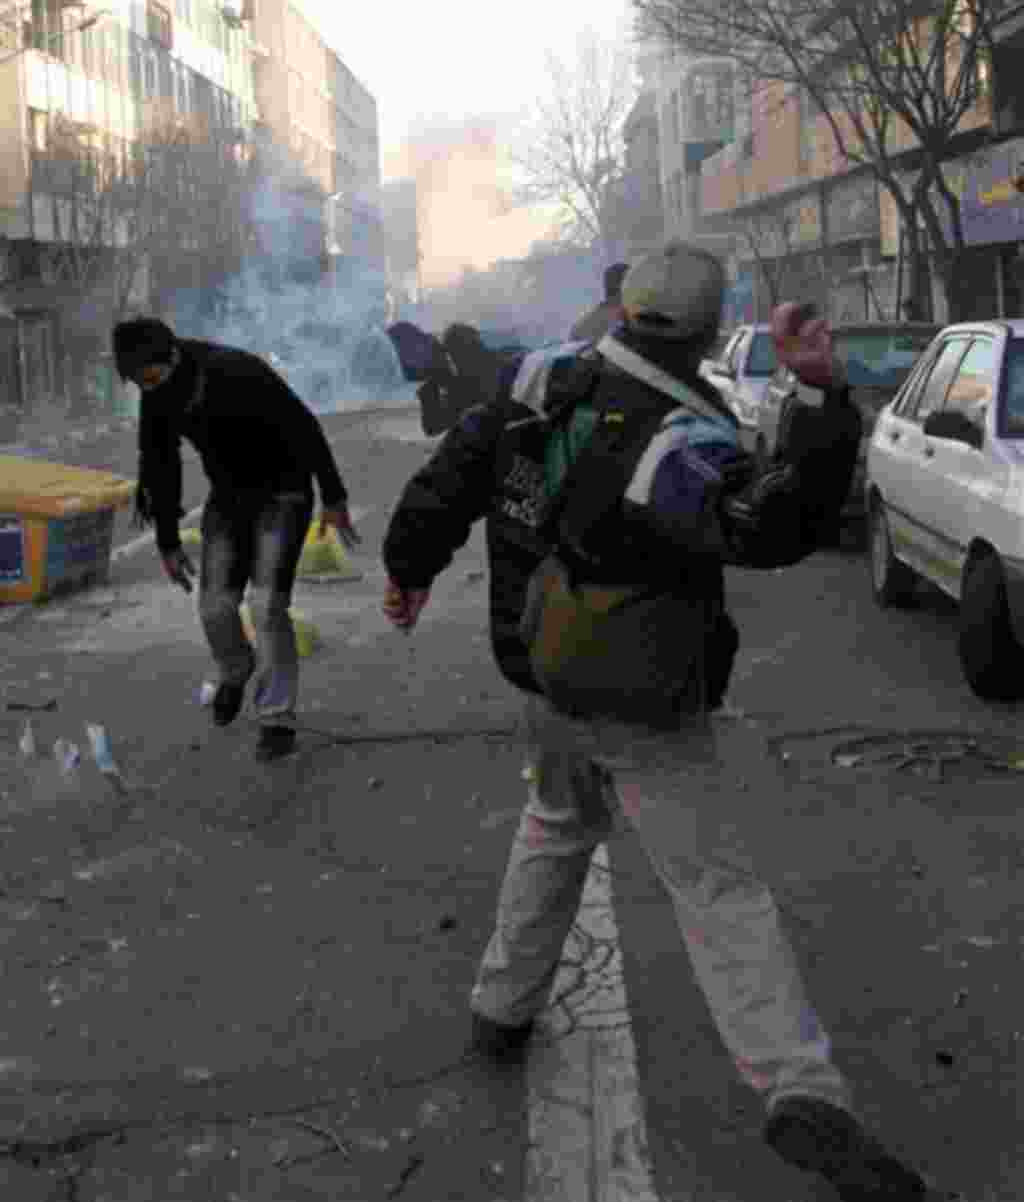 This photo, taken by an individual not employed by the Associated Press and obtained by the AP outside Iran shows Iranian protestors throwing stones at ant-riot police officers, during an anti-government protest in Tehran, Iran, Monday, Feb. 14, 2011. Eye